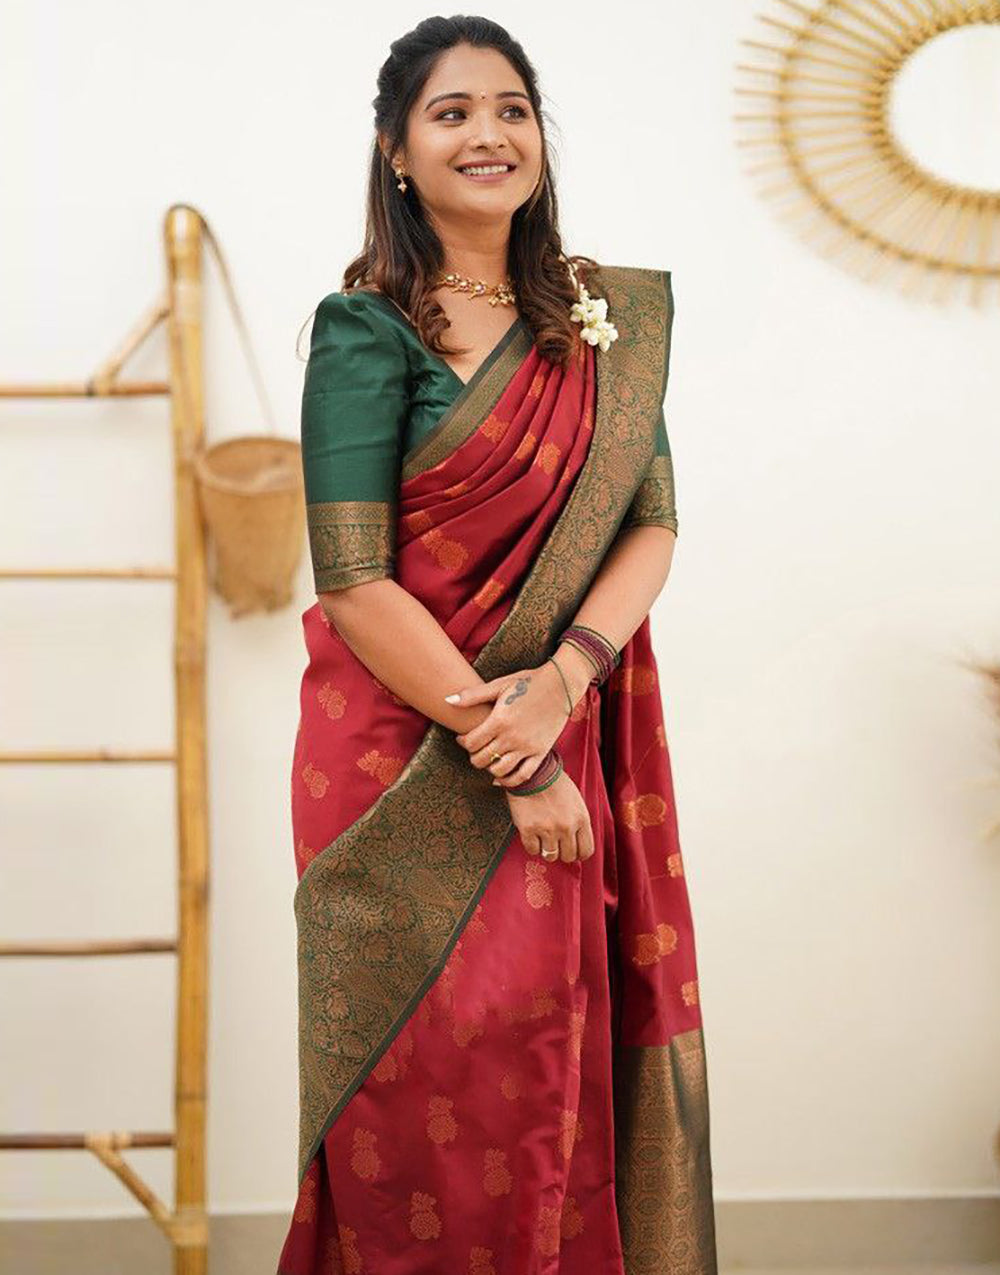 Hot Red Copper Zari Saree With Jaquard border Blouse